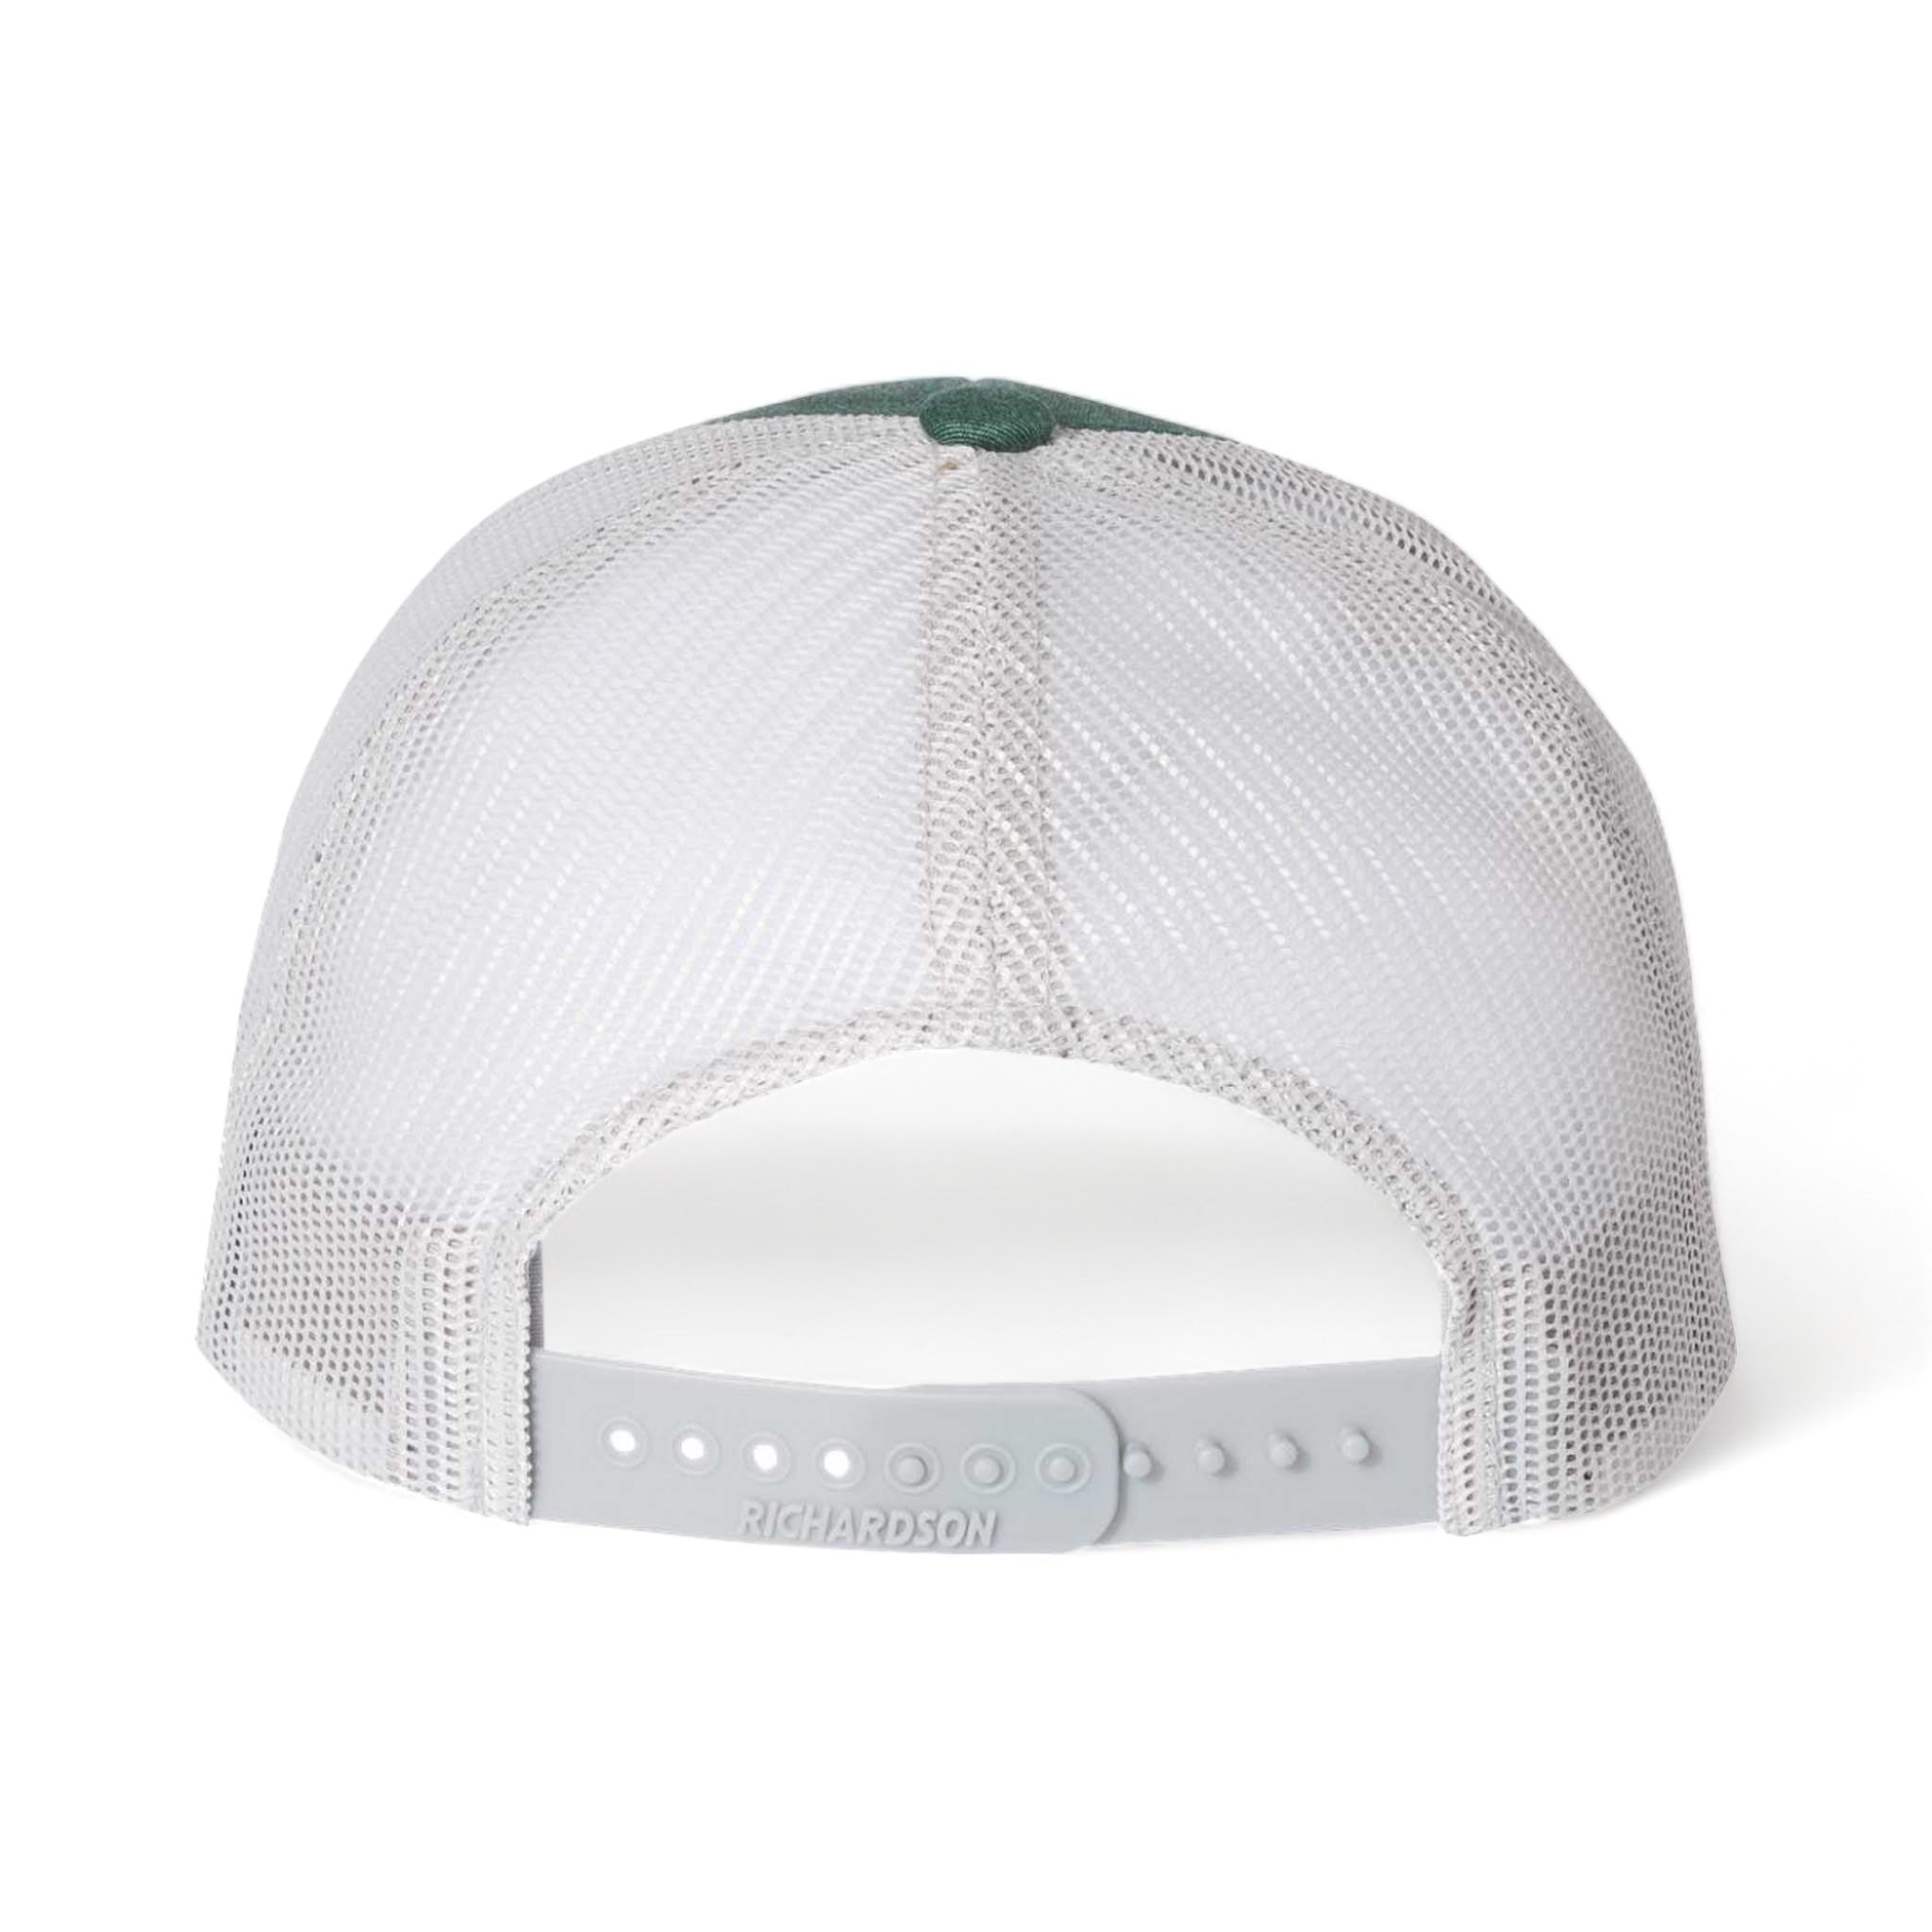 Back view of Richardson 115 custom hat in heather dark green and silver